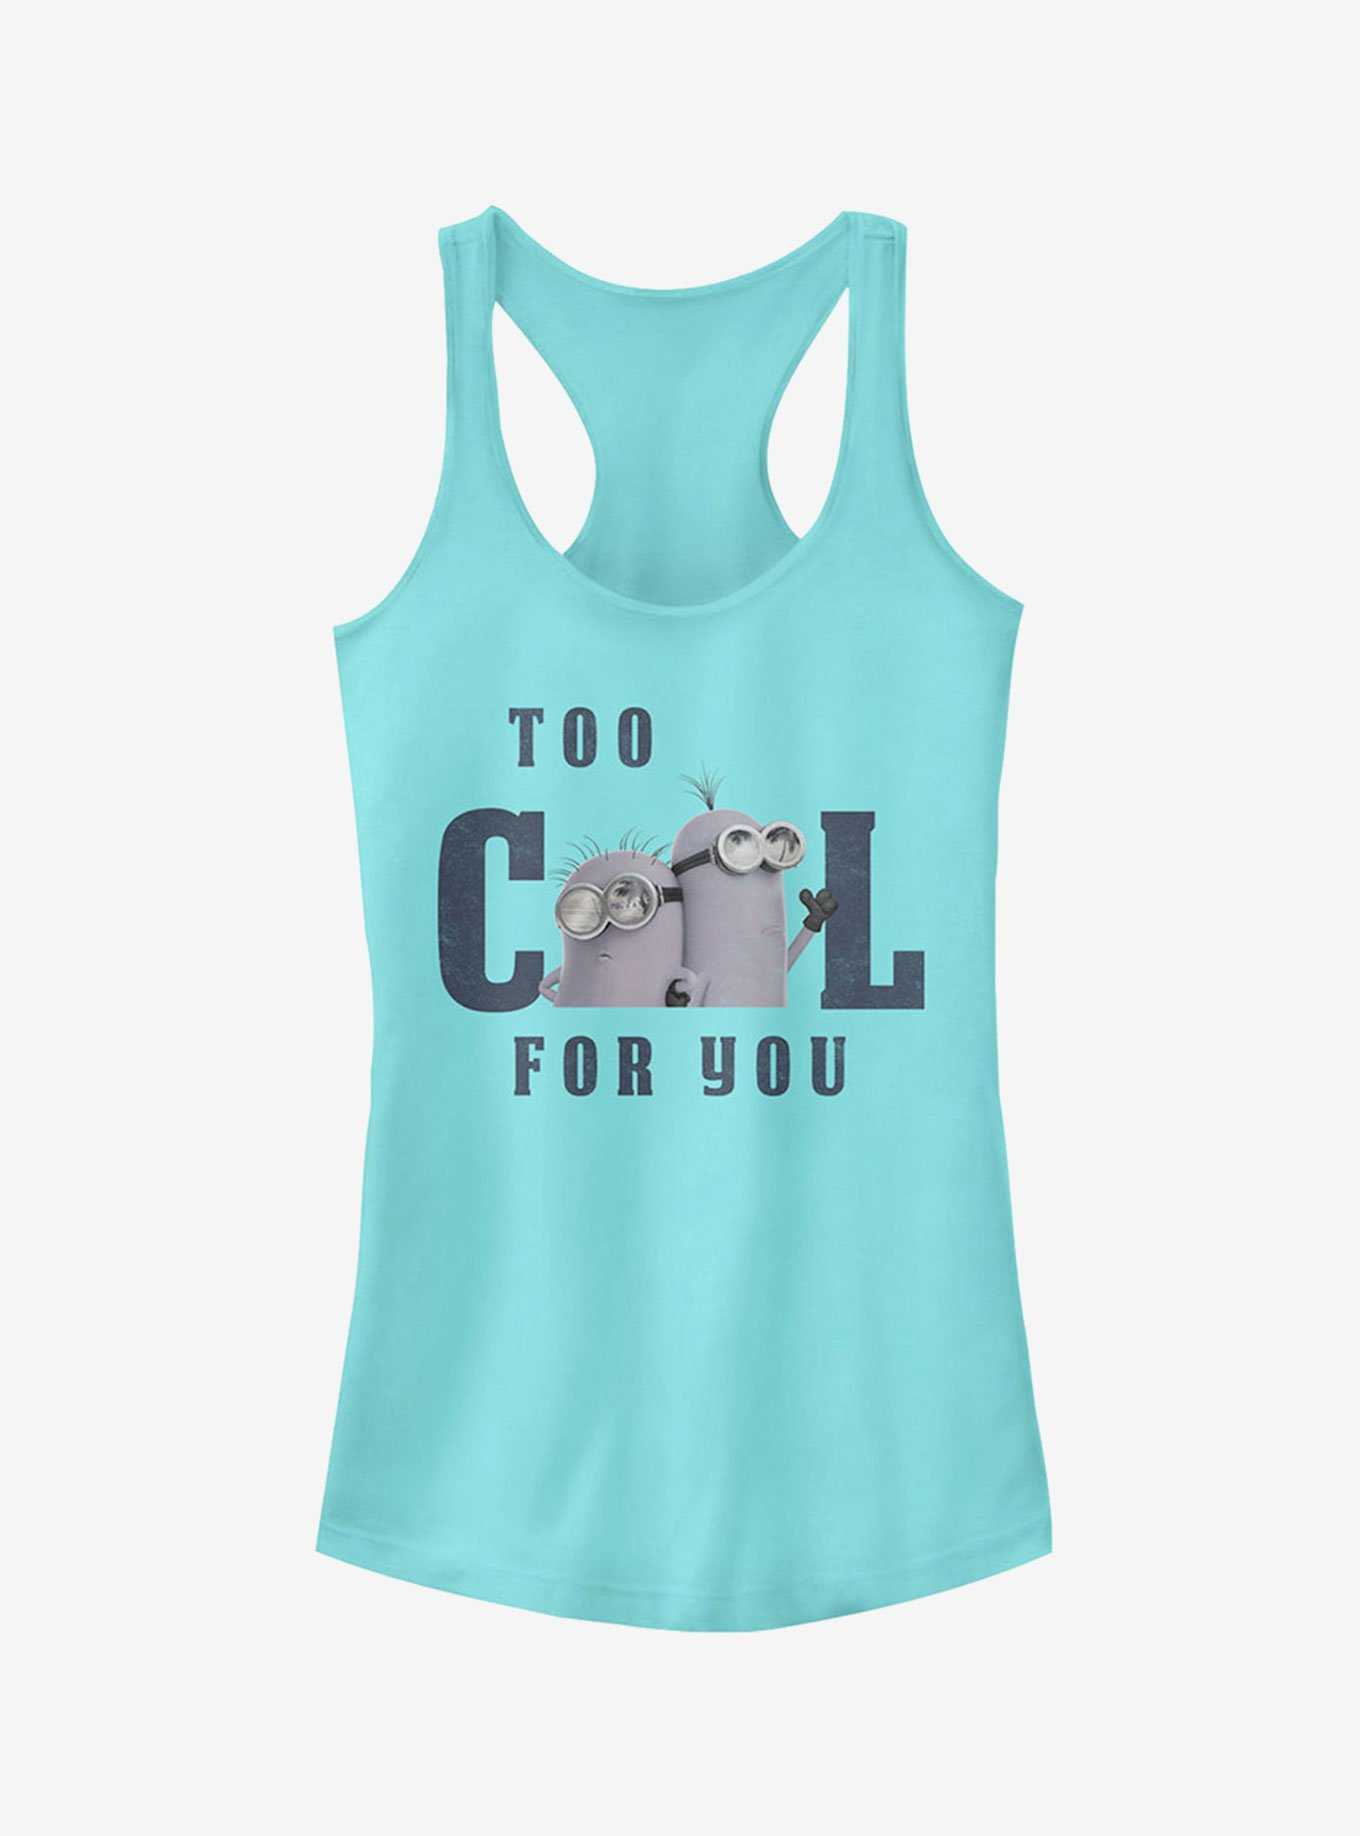 Minions Too Cool for You Girls Tank Top, , hi-res